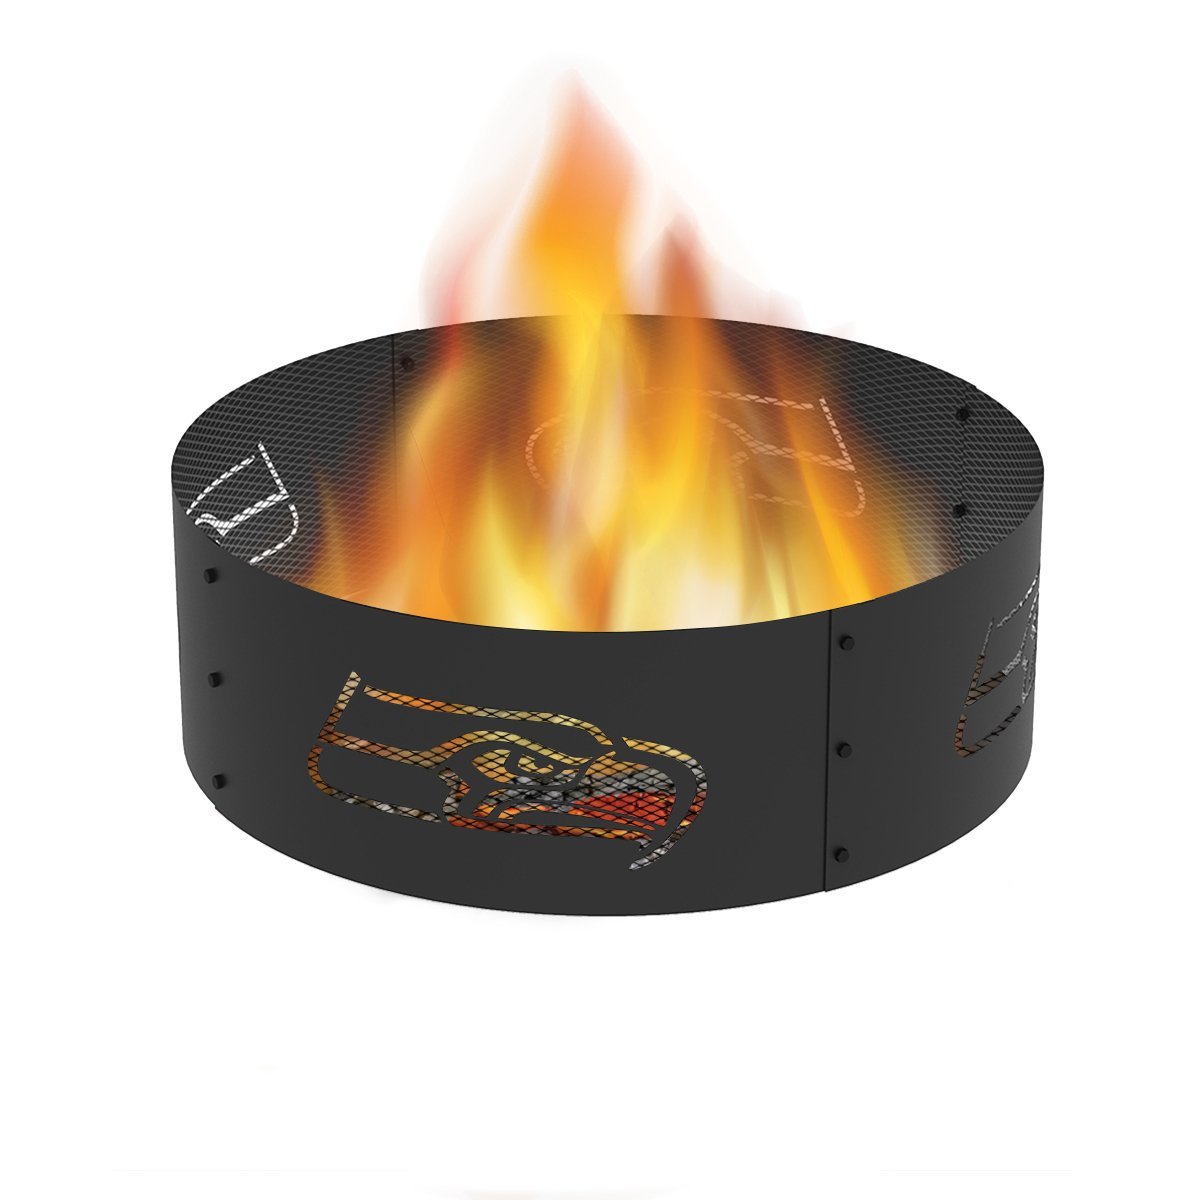 Blue Sky Outdoor Fire Pits - NFL Licensed Seattle Seahawks - Senior.com Fire Pits